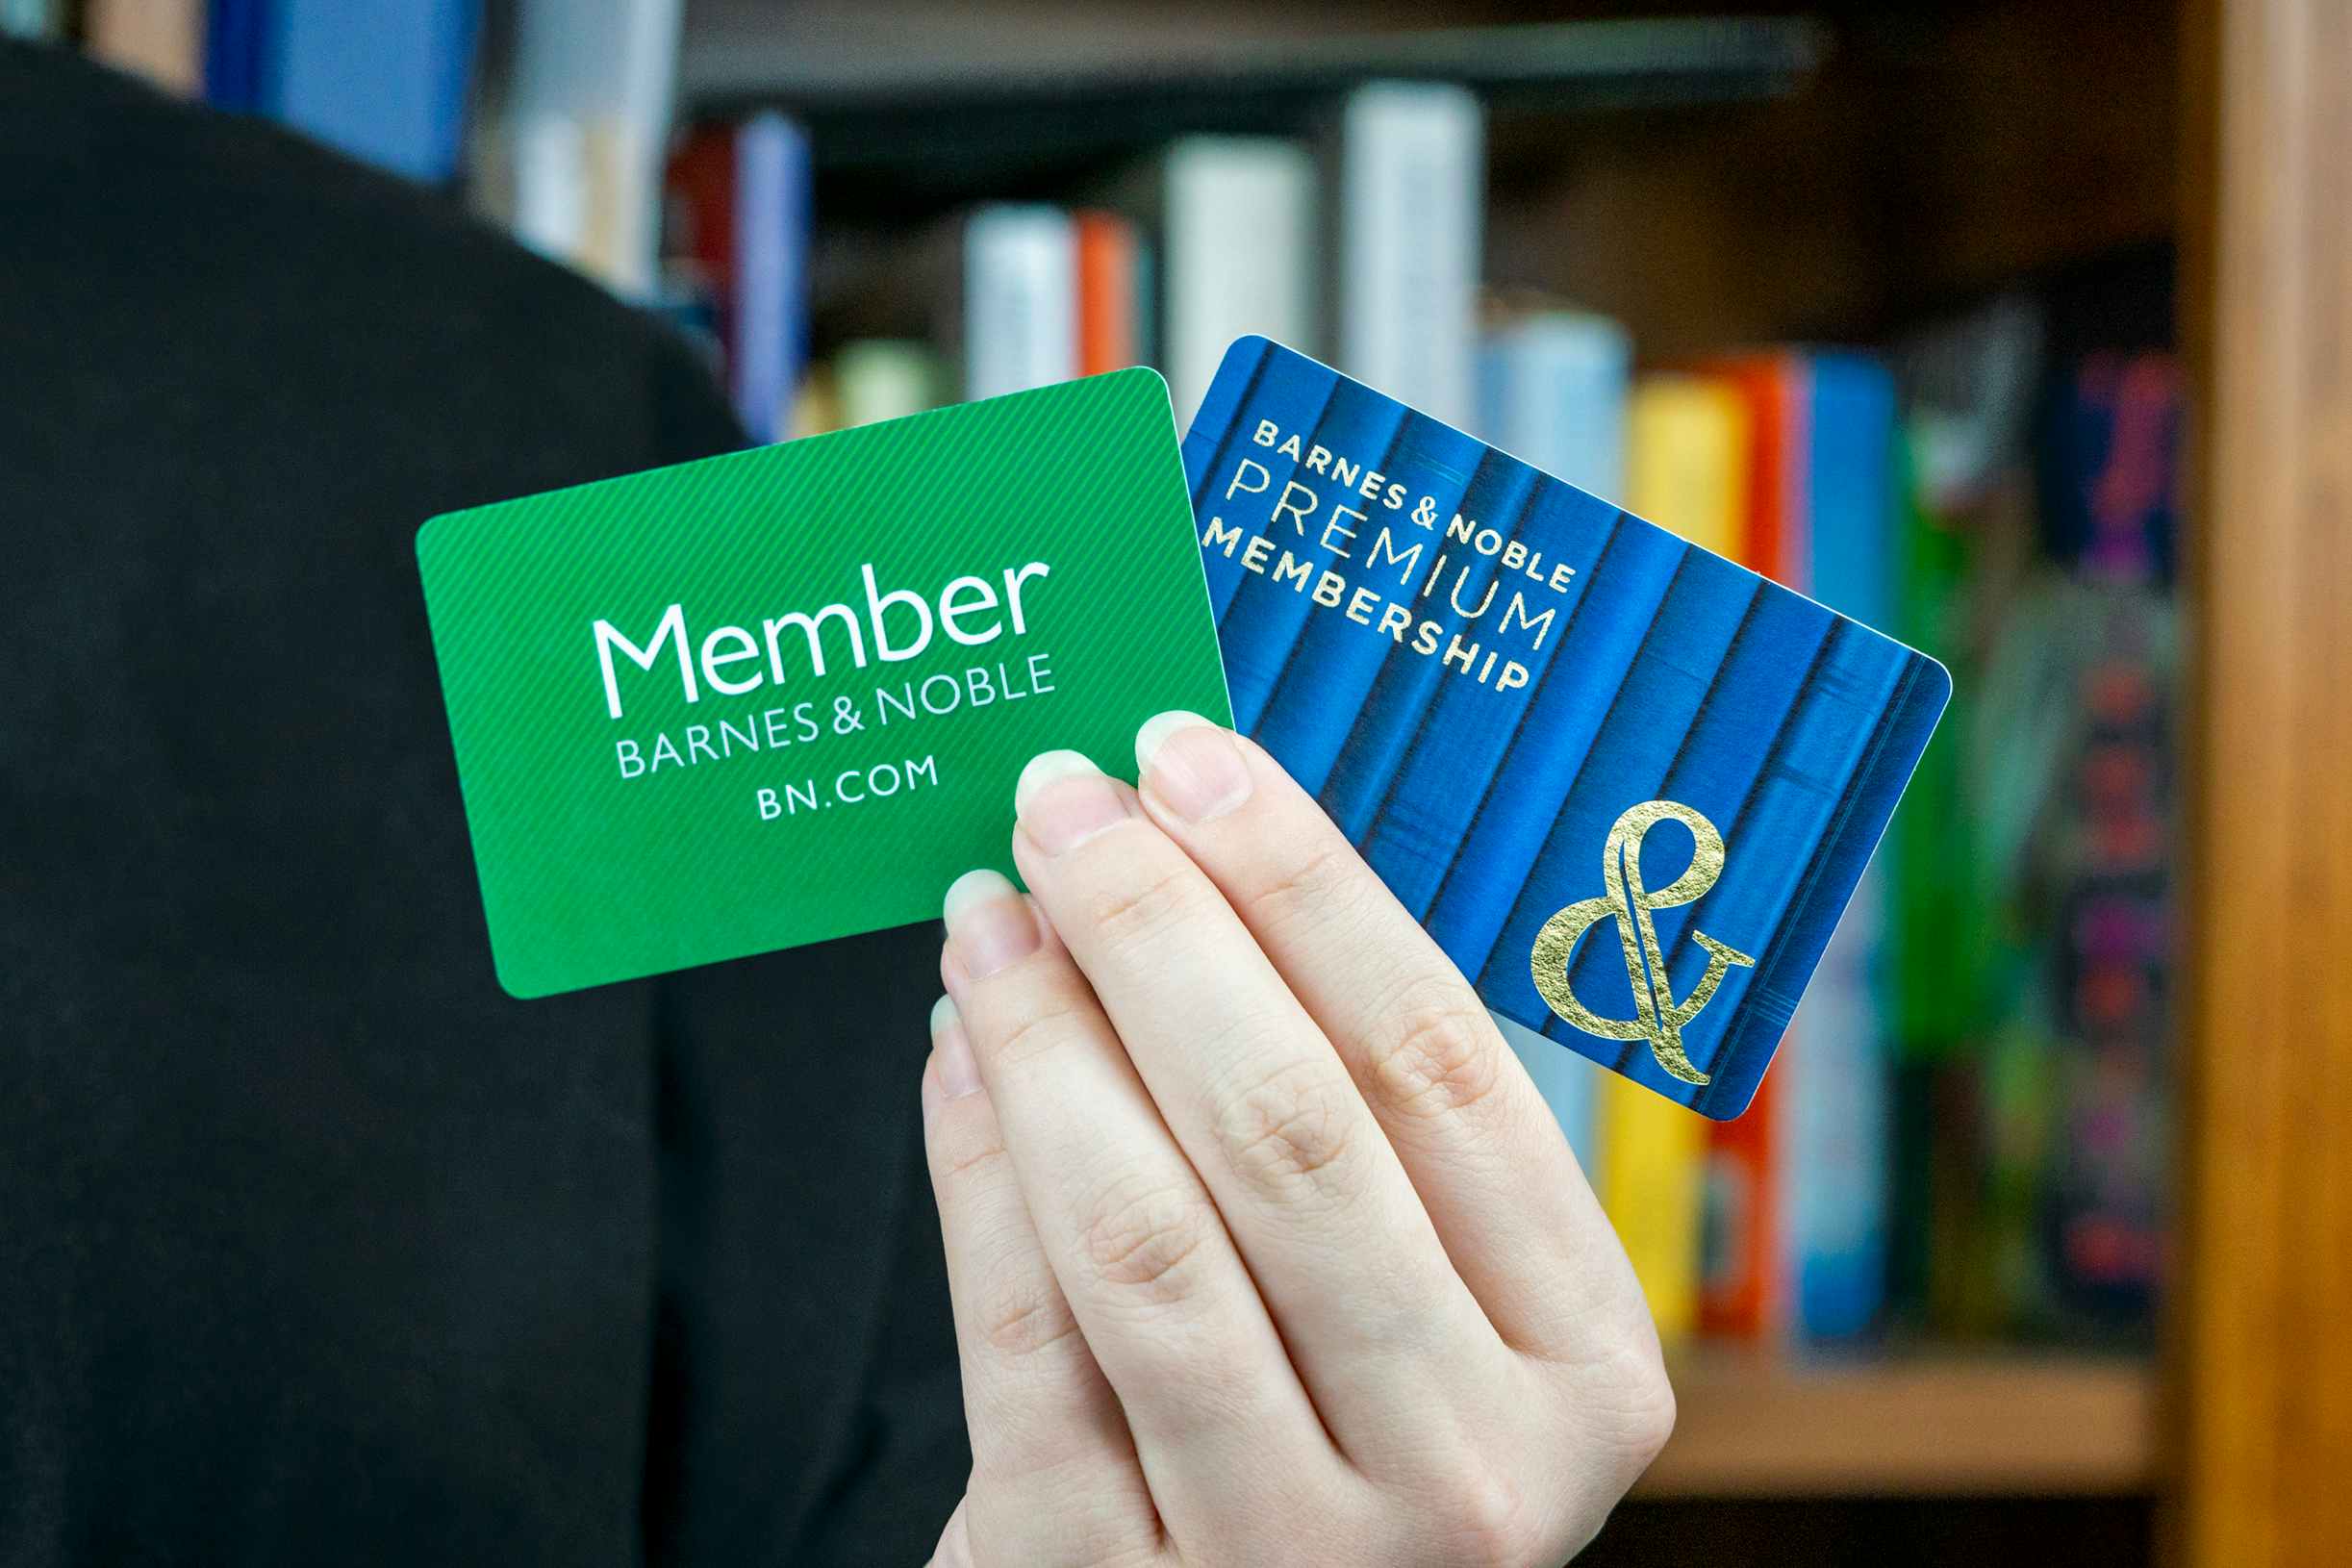 someone standing near a bookshelf, holding up a free and premium barnes and noble membership card